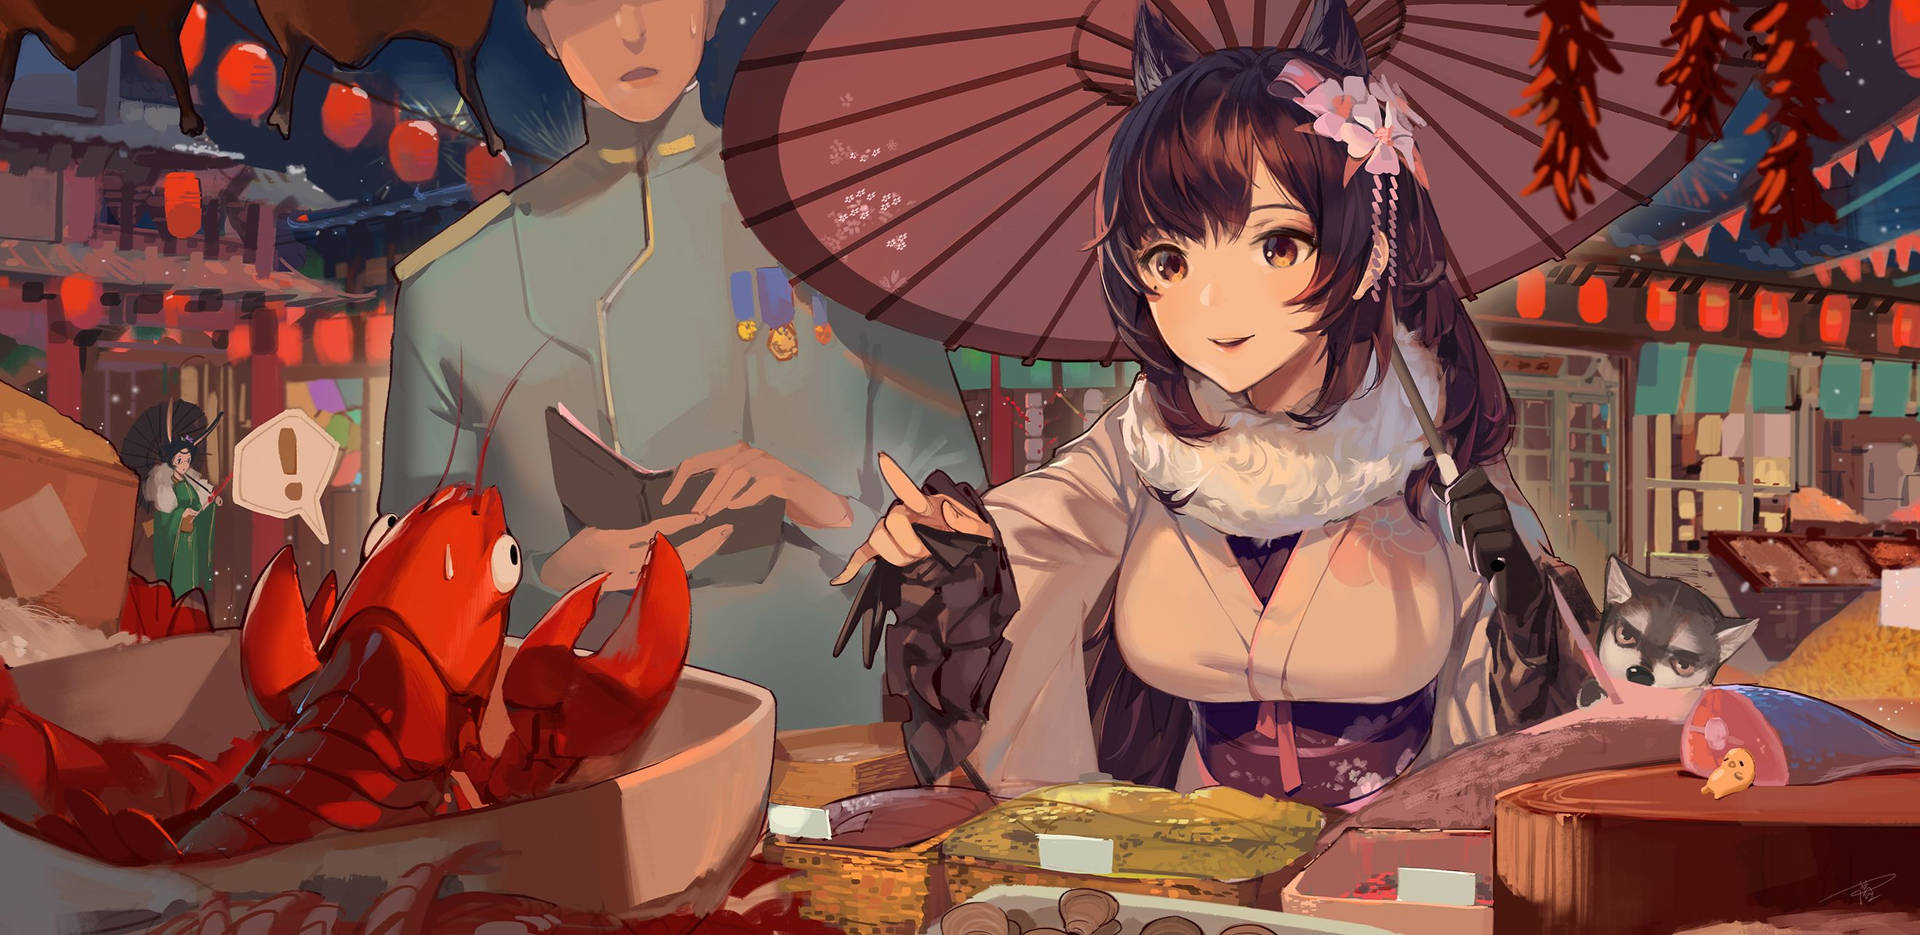 Let's Celebrate with Lobster at Atago's Cuisine Wallpaper